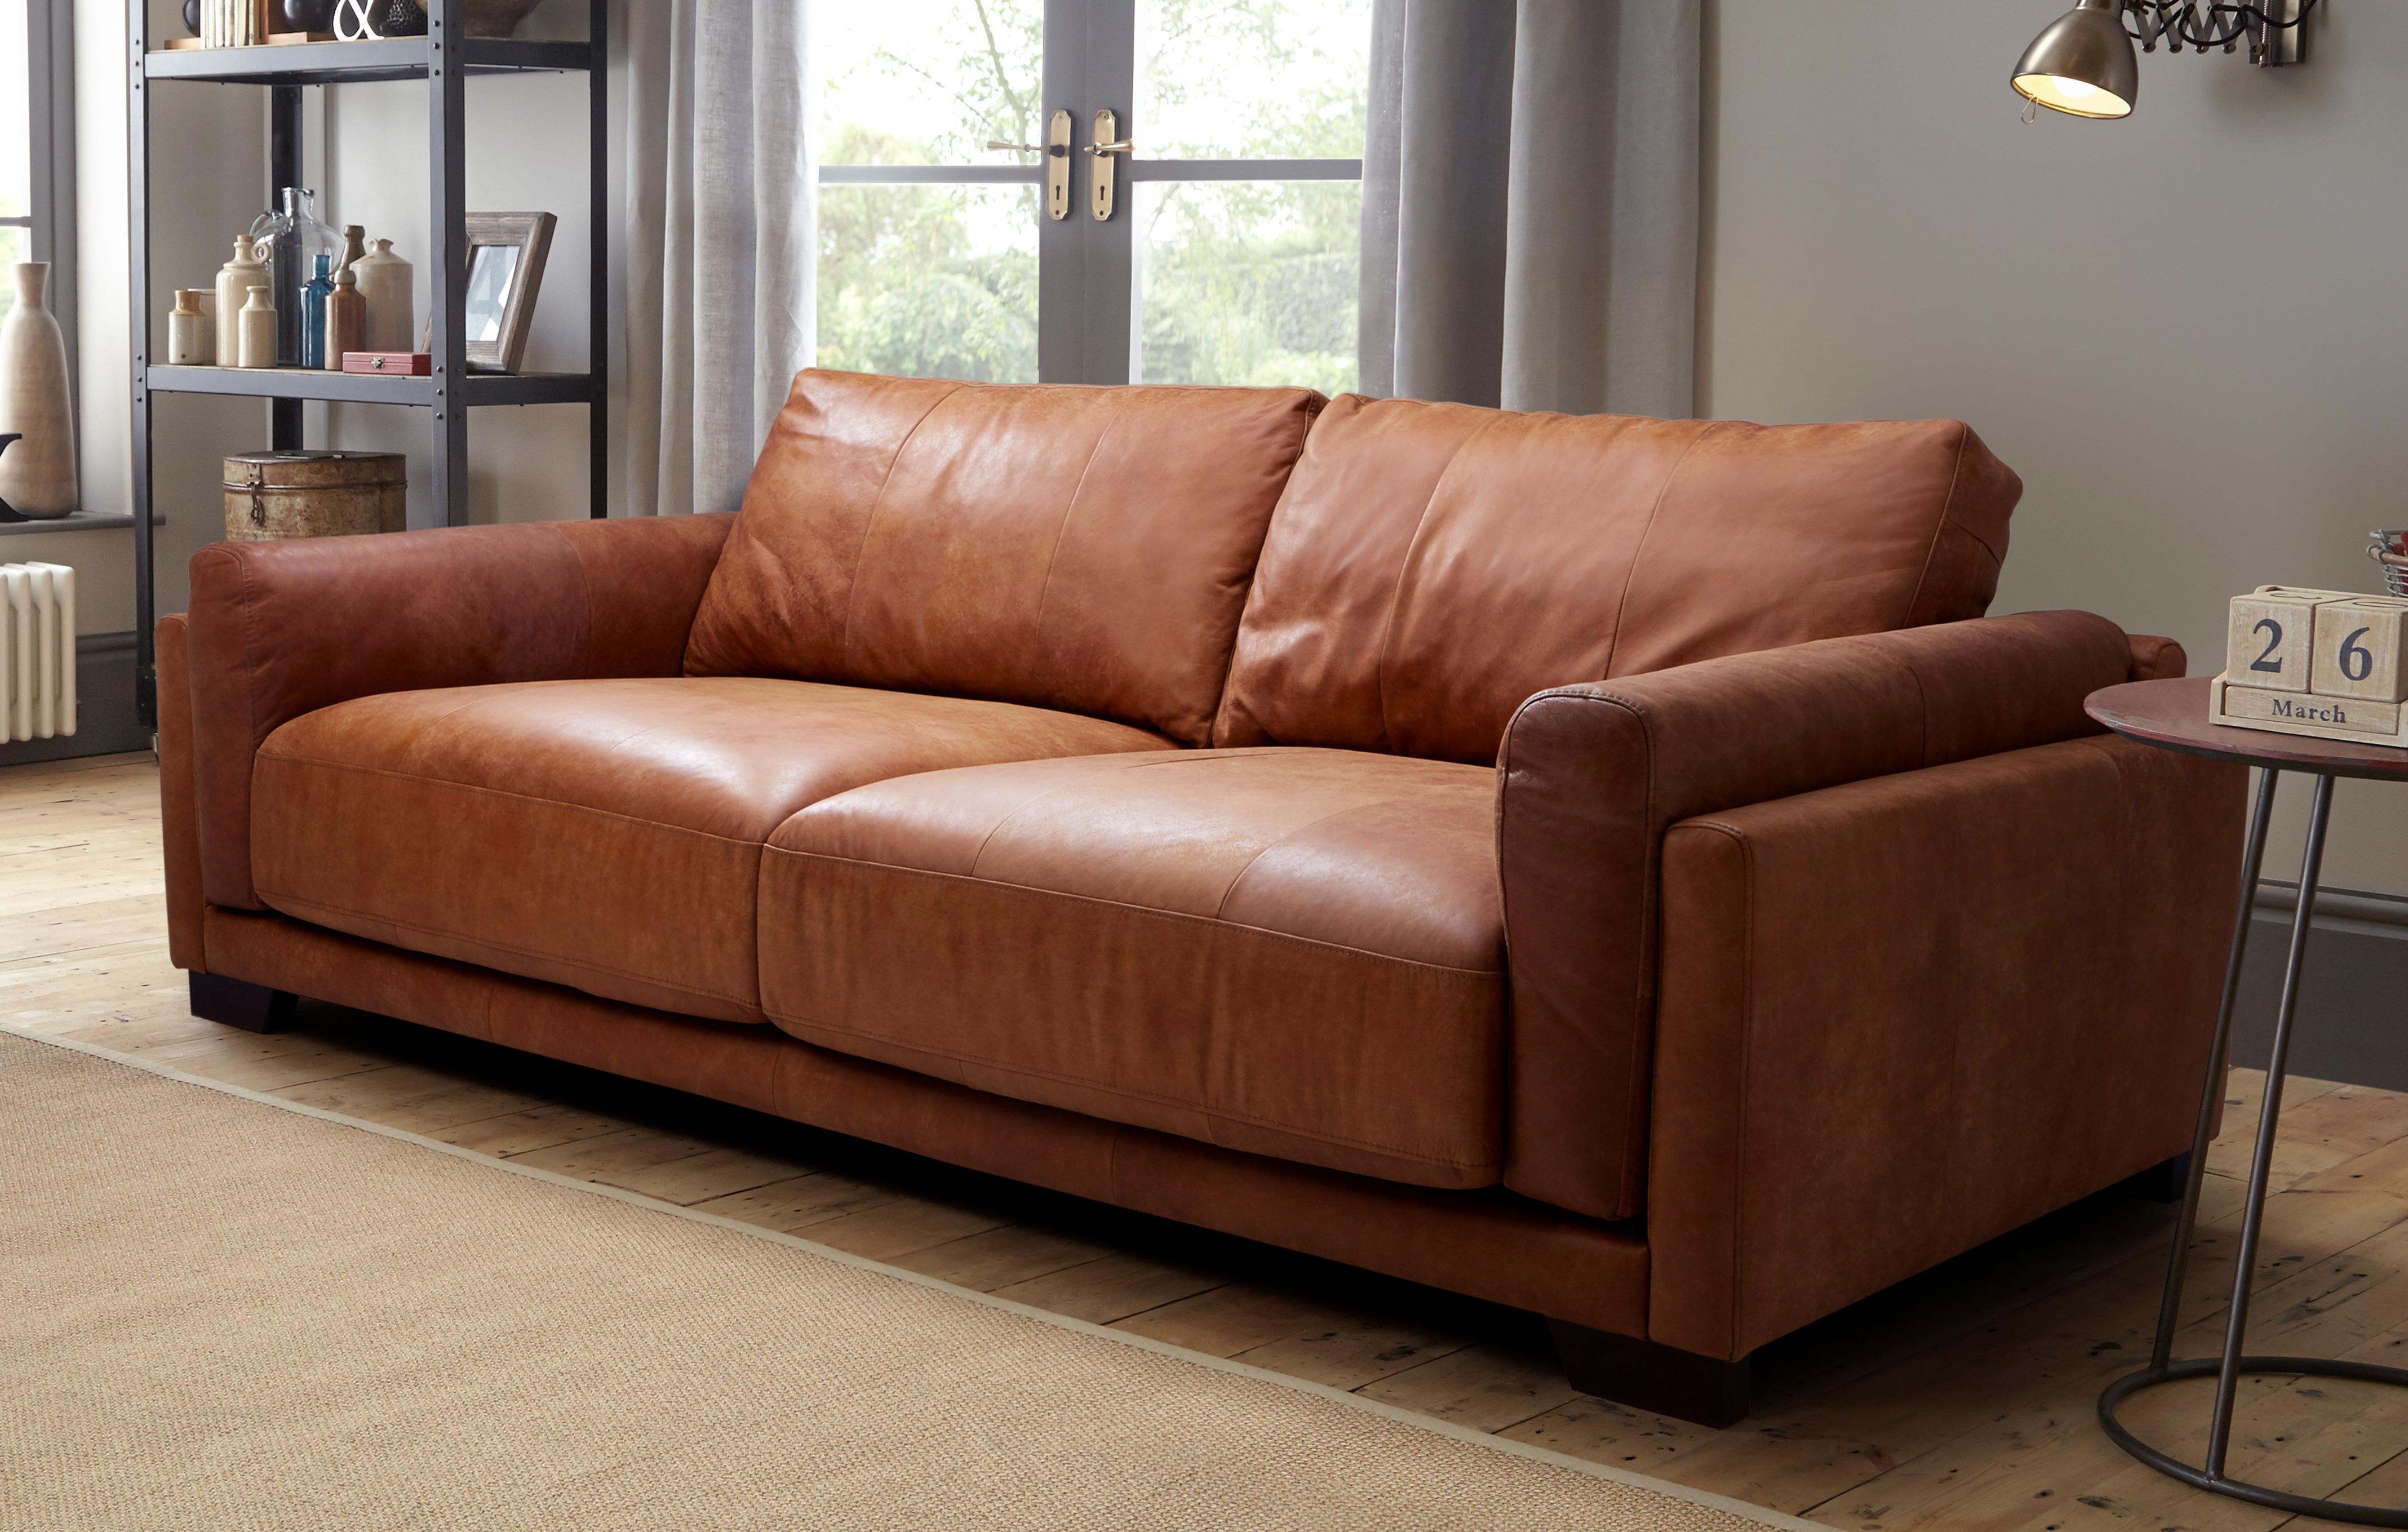 Quality Leather Sofas | Leather Couch & Sofa Sets | Dfs